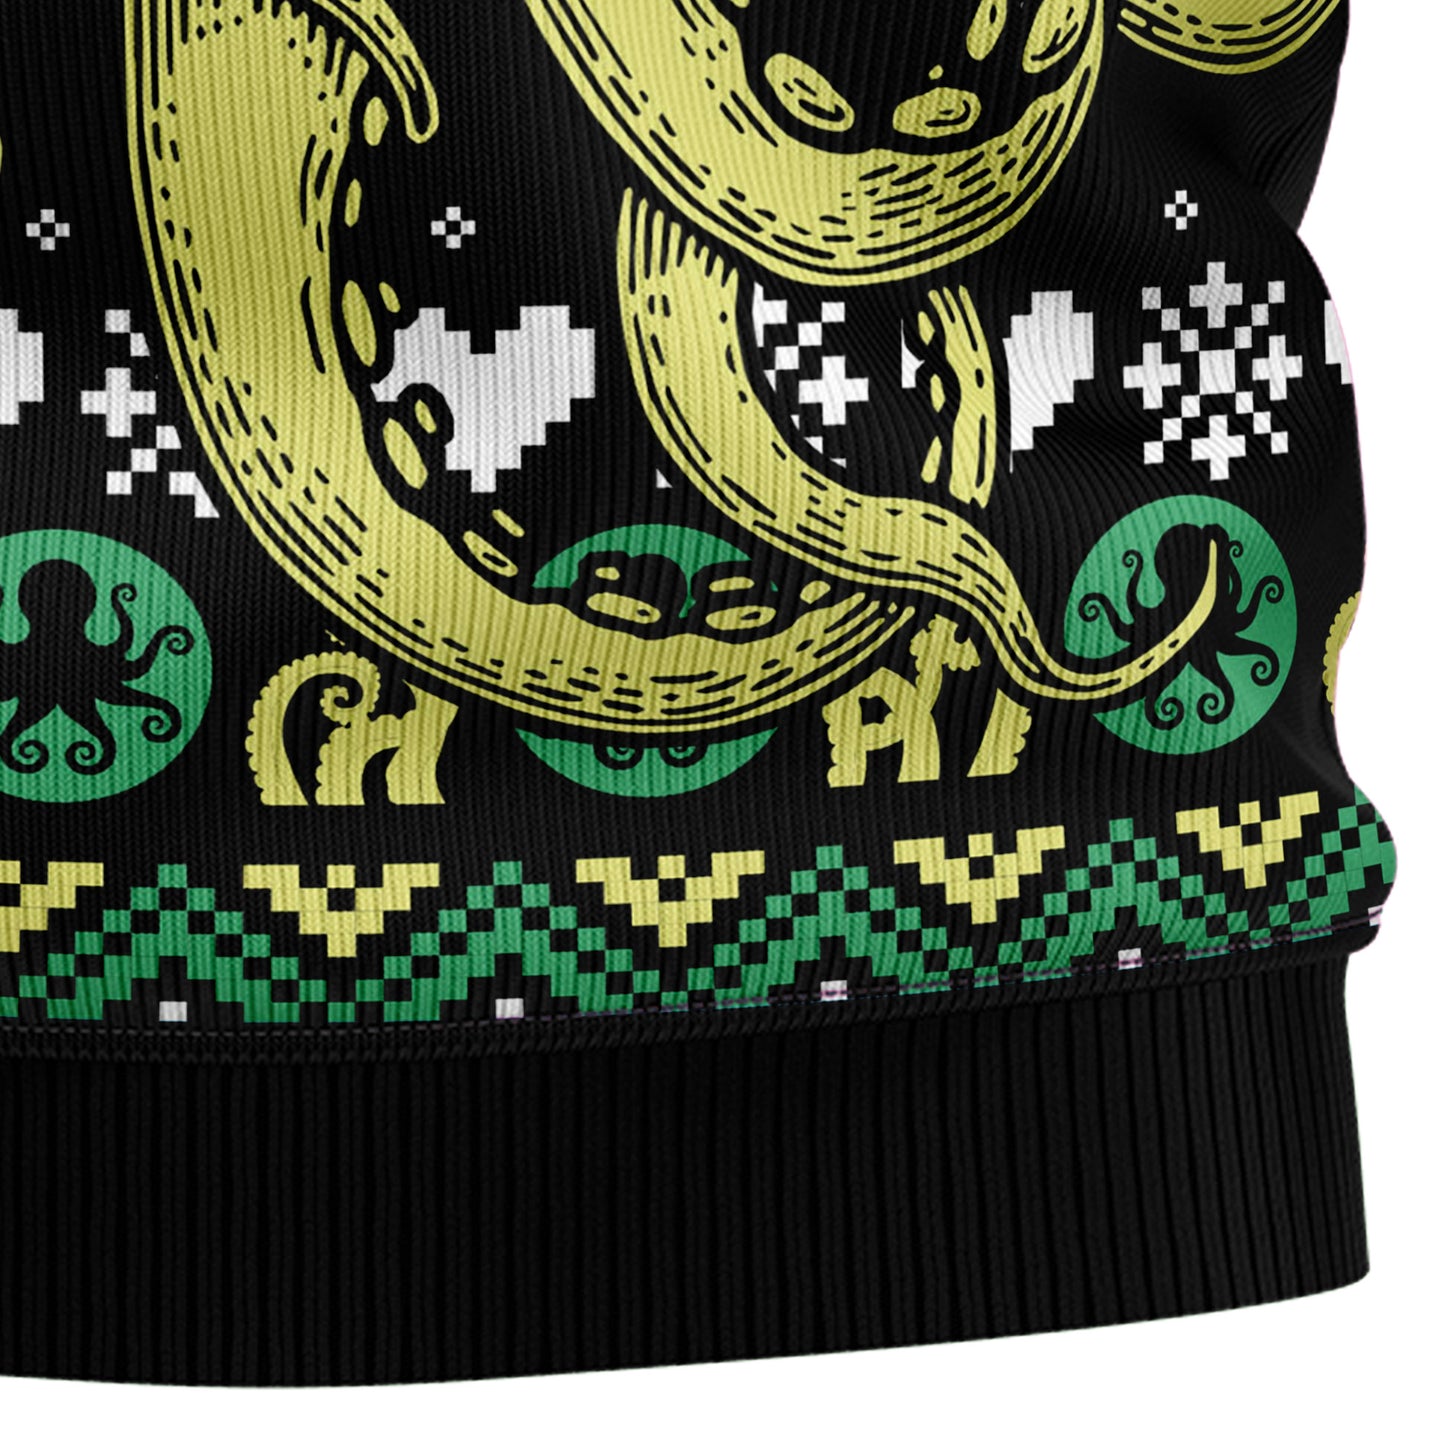 Octopus Cool D3009 Ugly Christmas Sweater